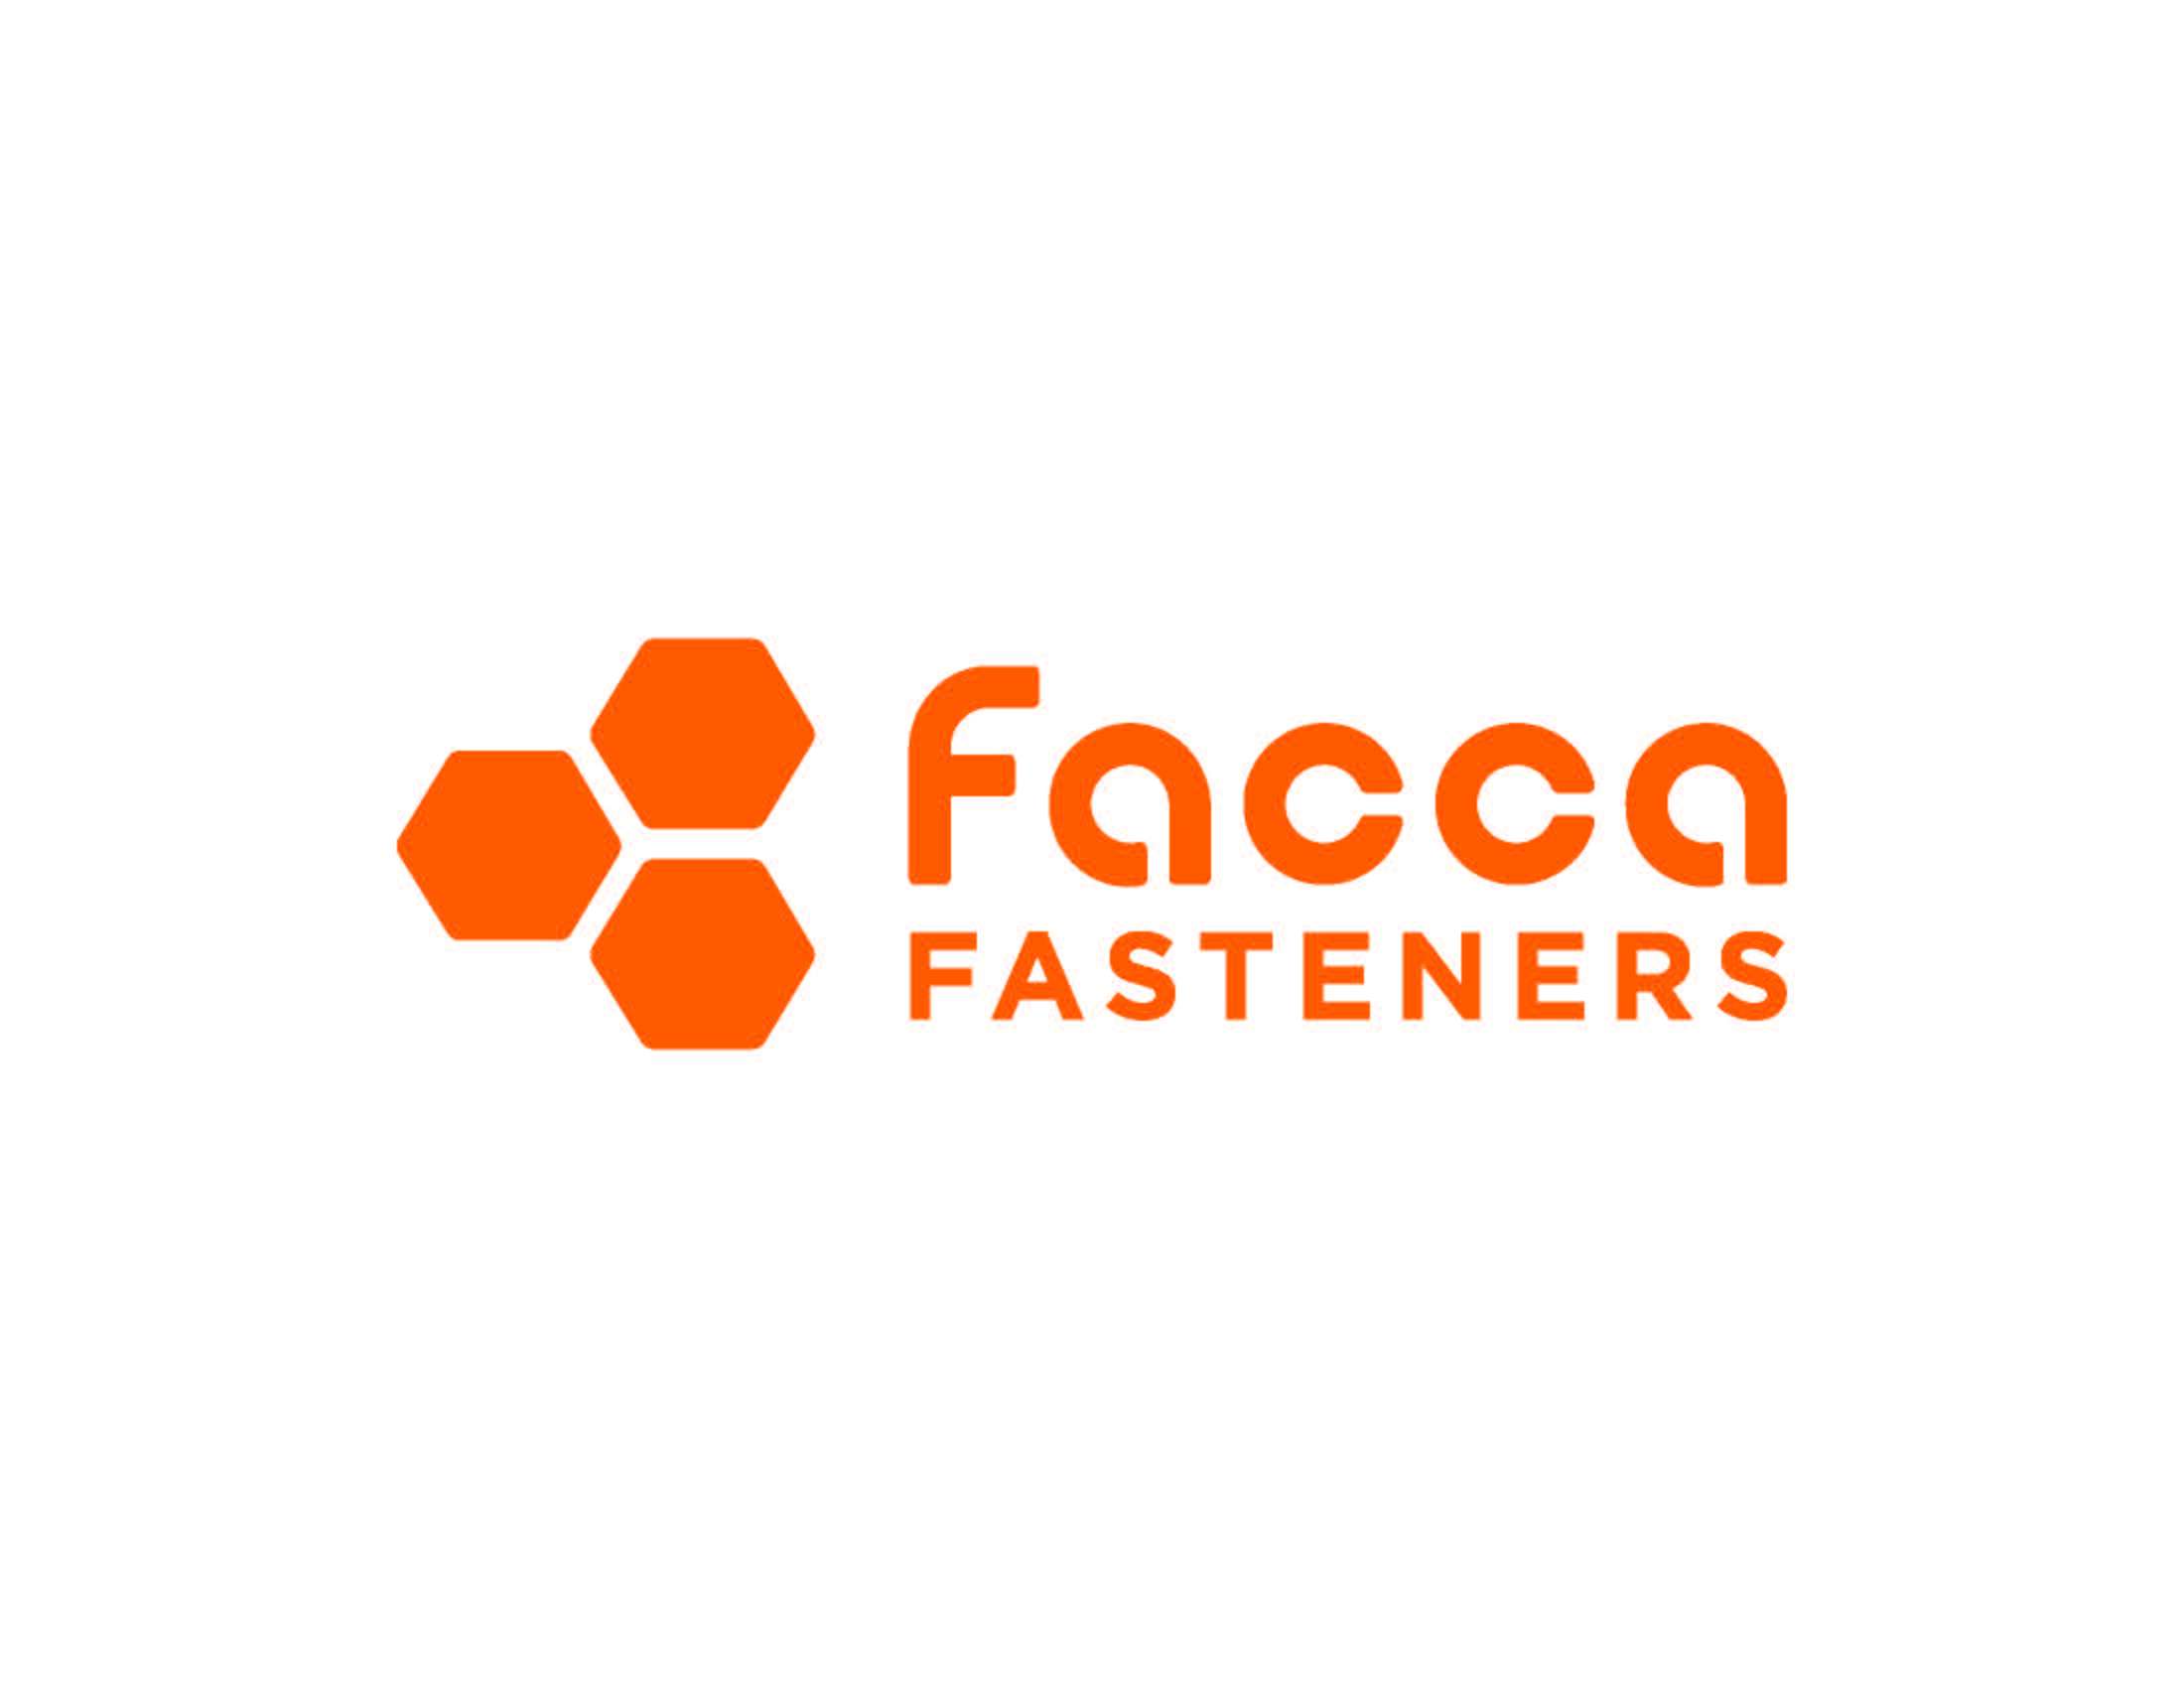 Facca Fasteners Limited